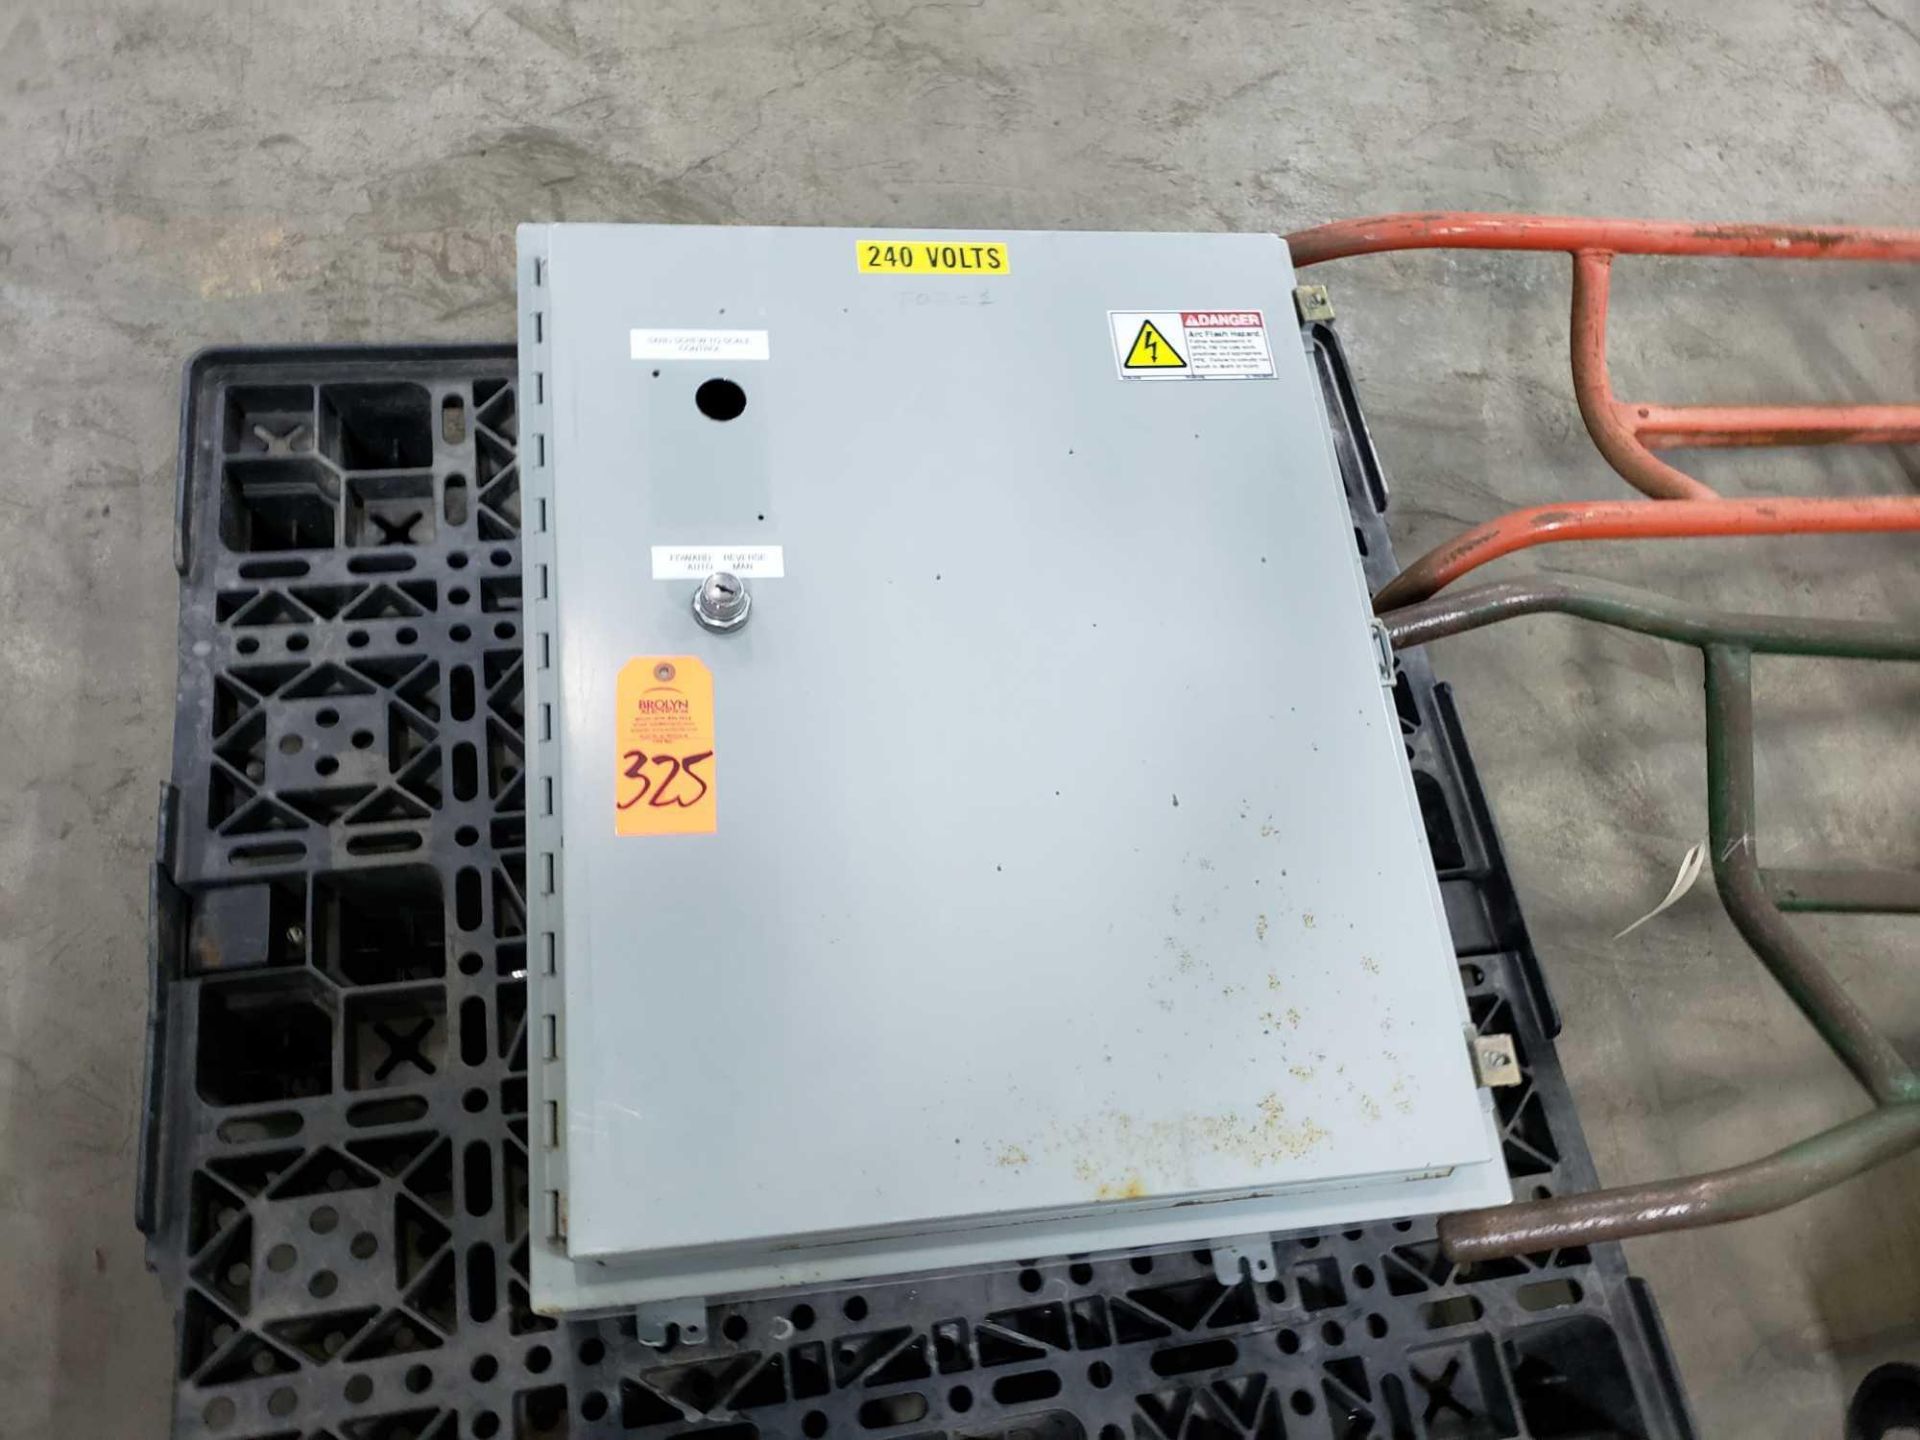 Electrical control box with contents.